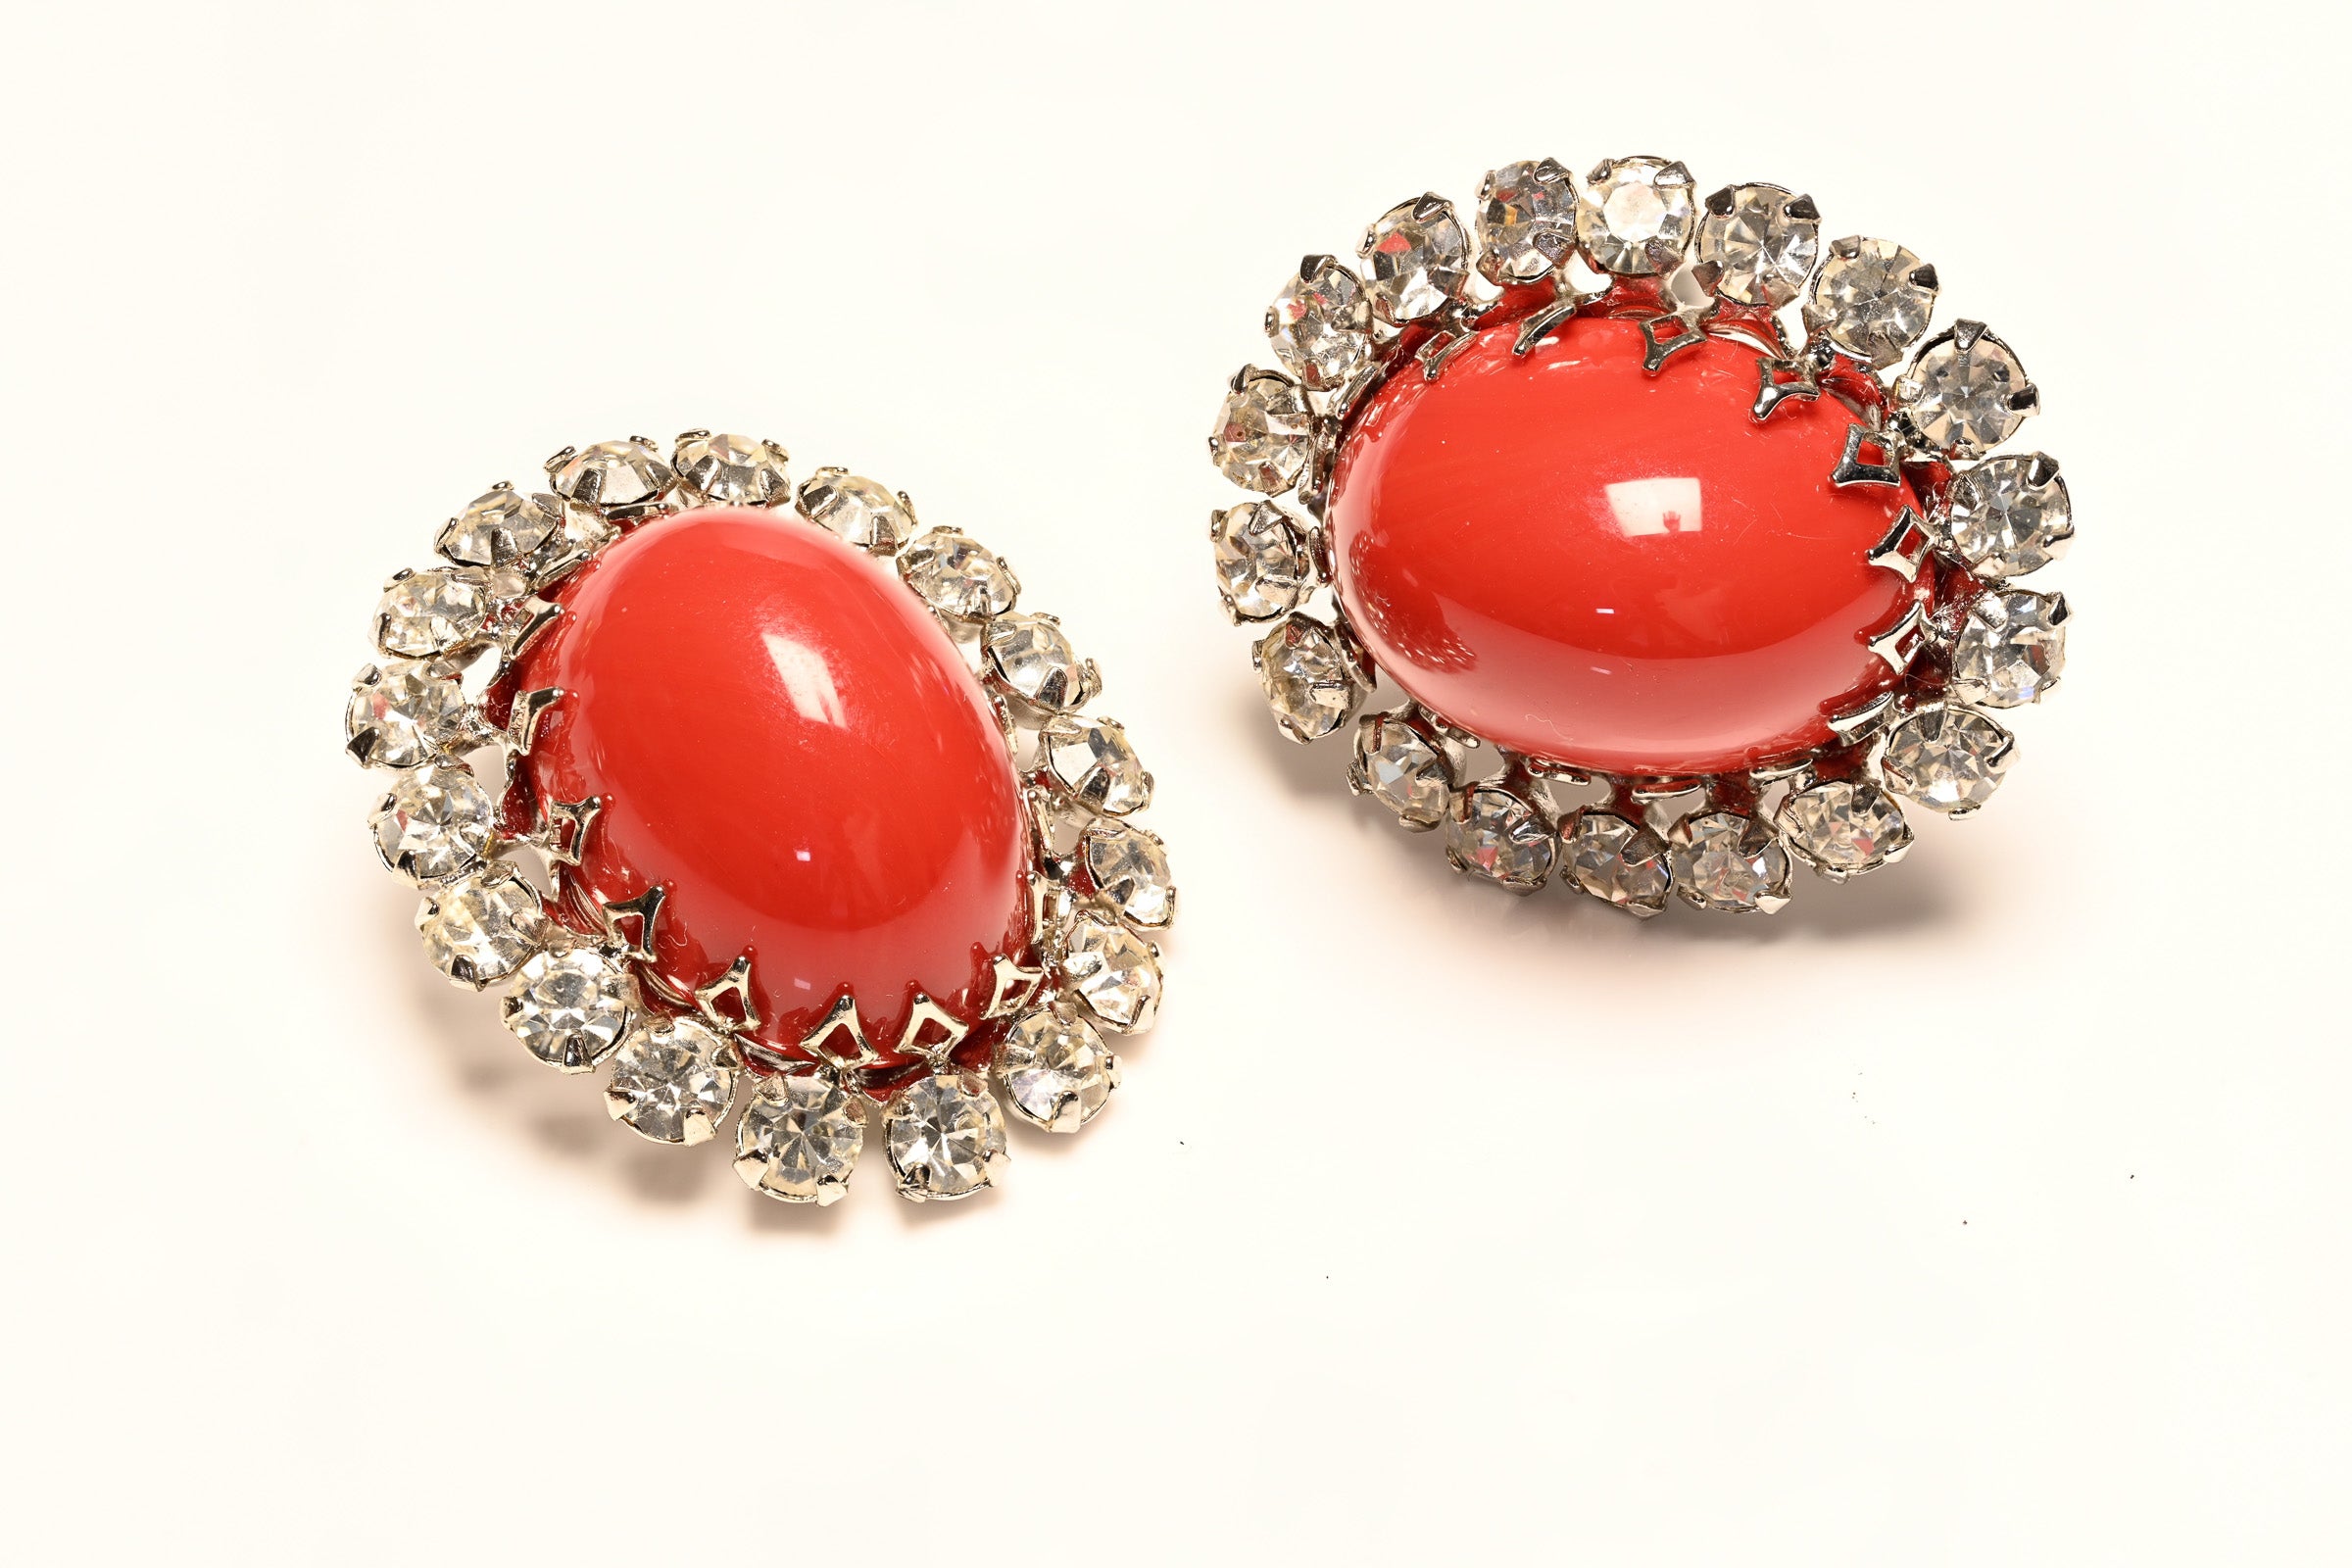 Vintage Schreiner NY Large Red Cabochon Crystal Earrings